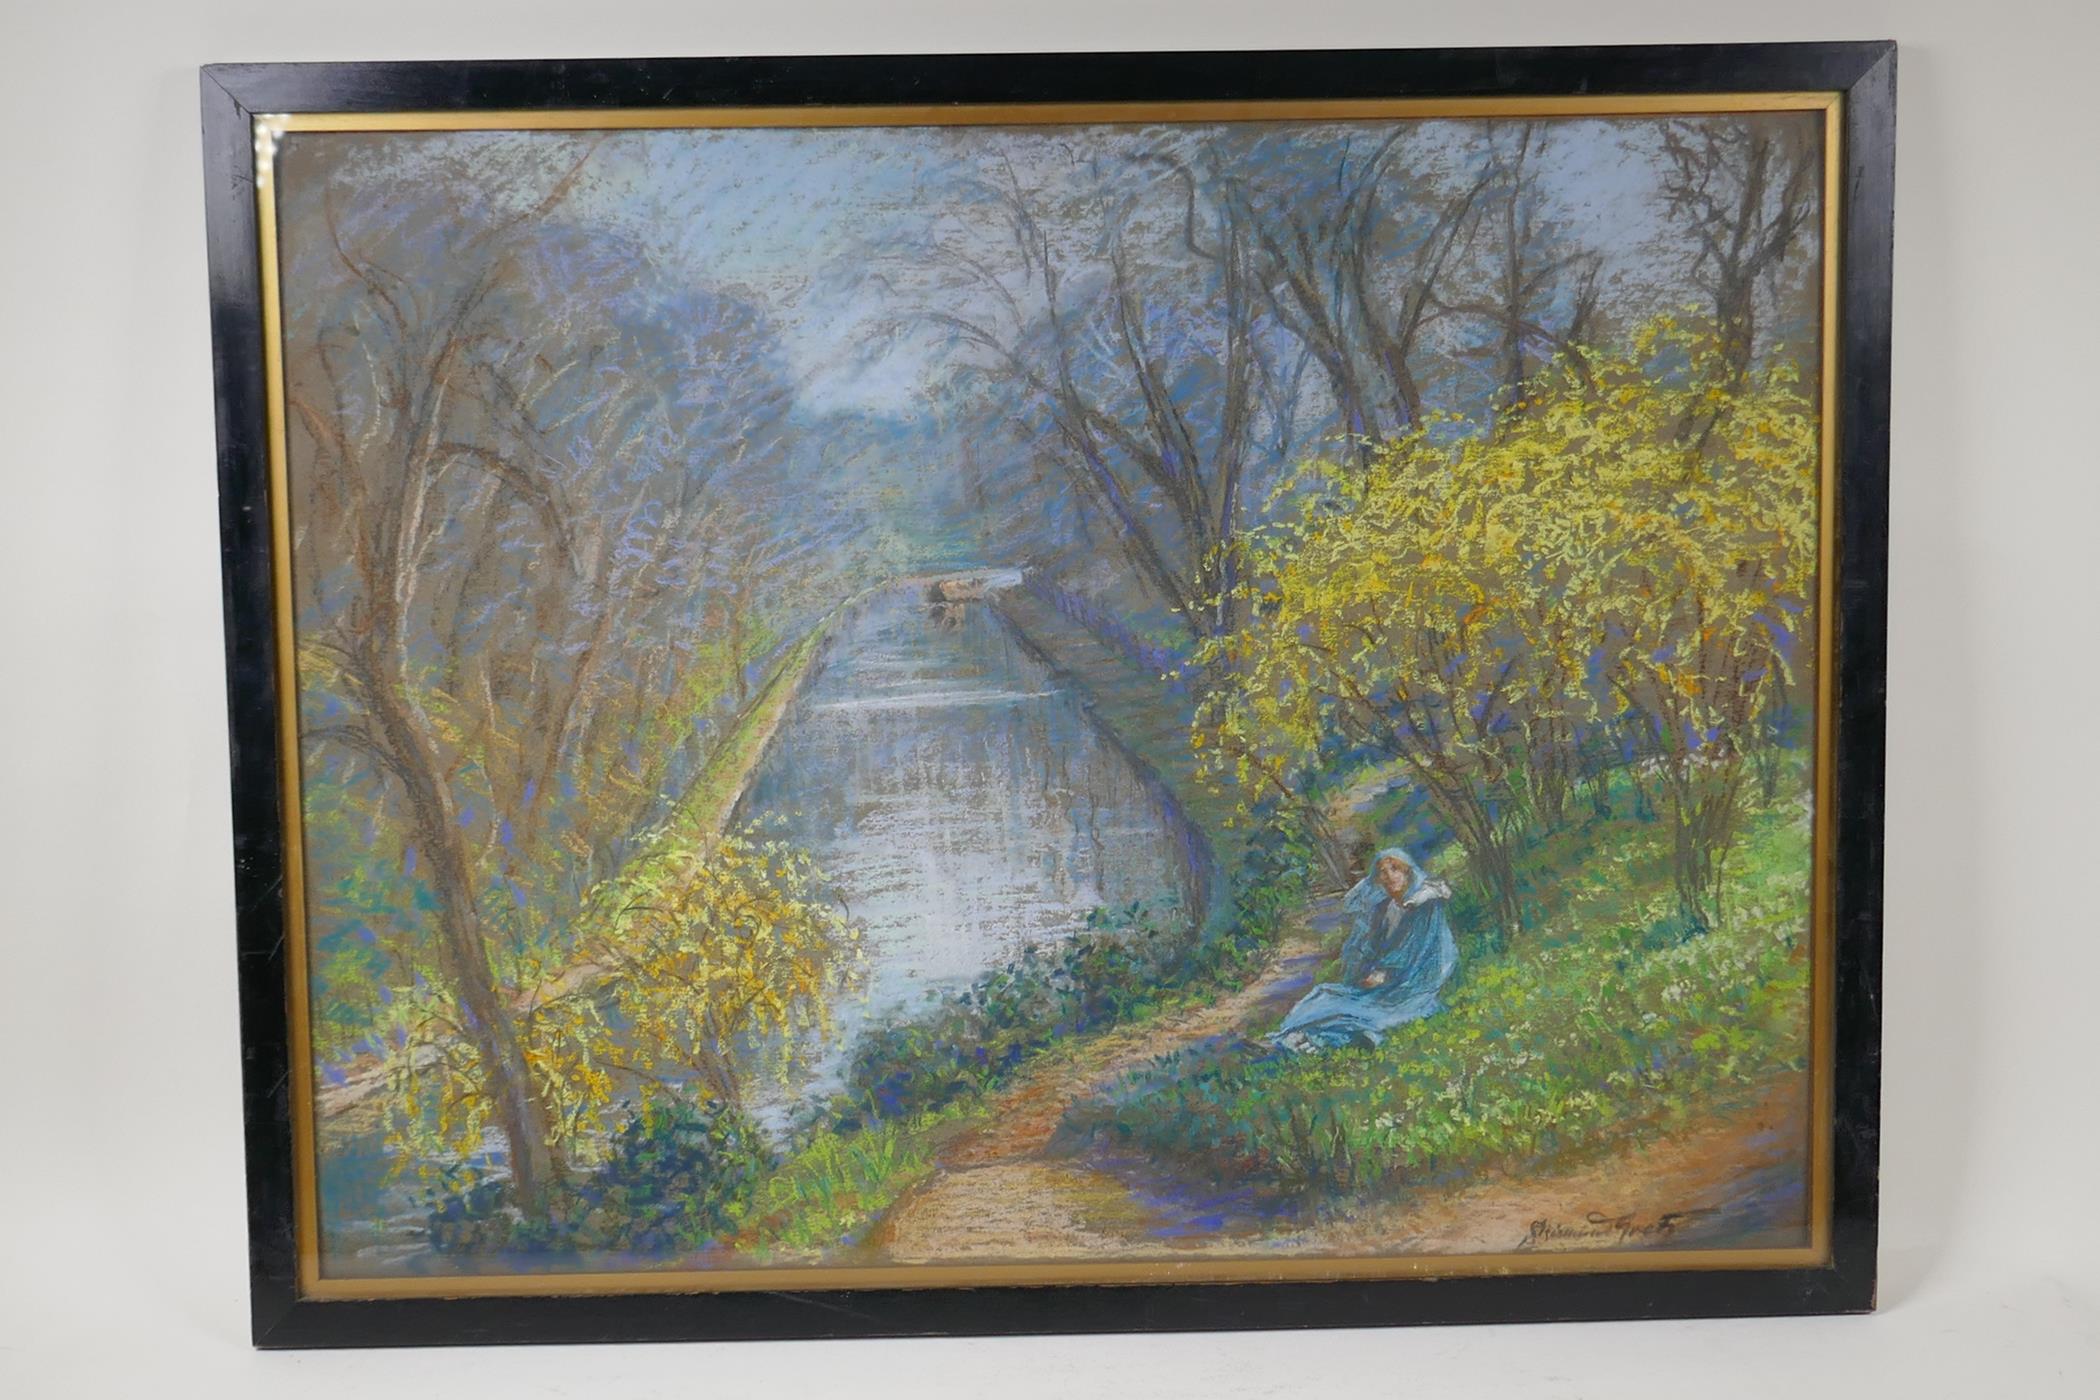 Sigismund Goetze, young woman seated in a river landscape, signed pastel drawing, 18" x 24" - Image 2 of 5